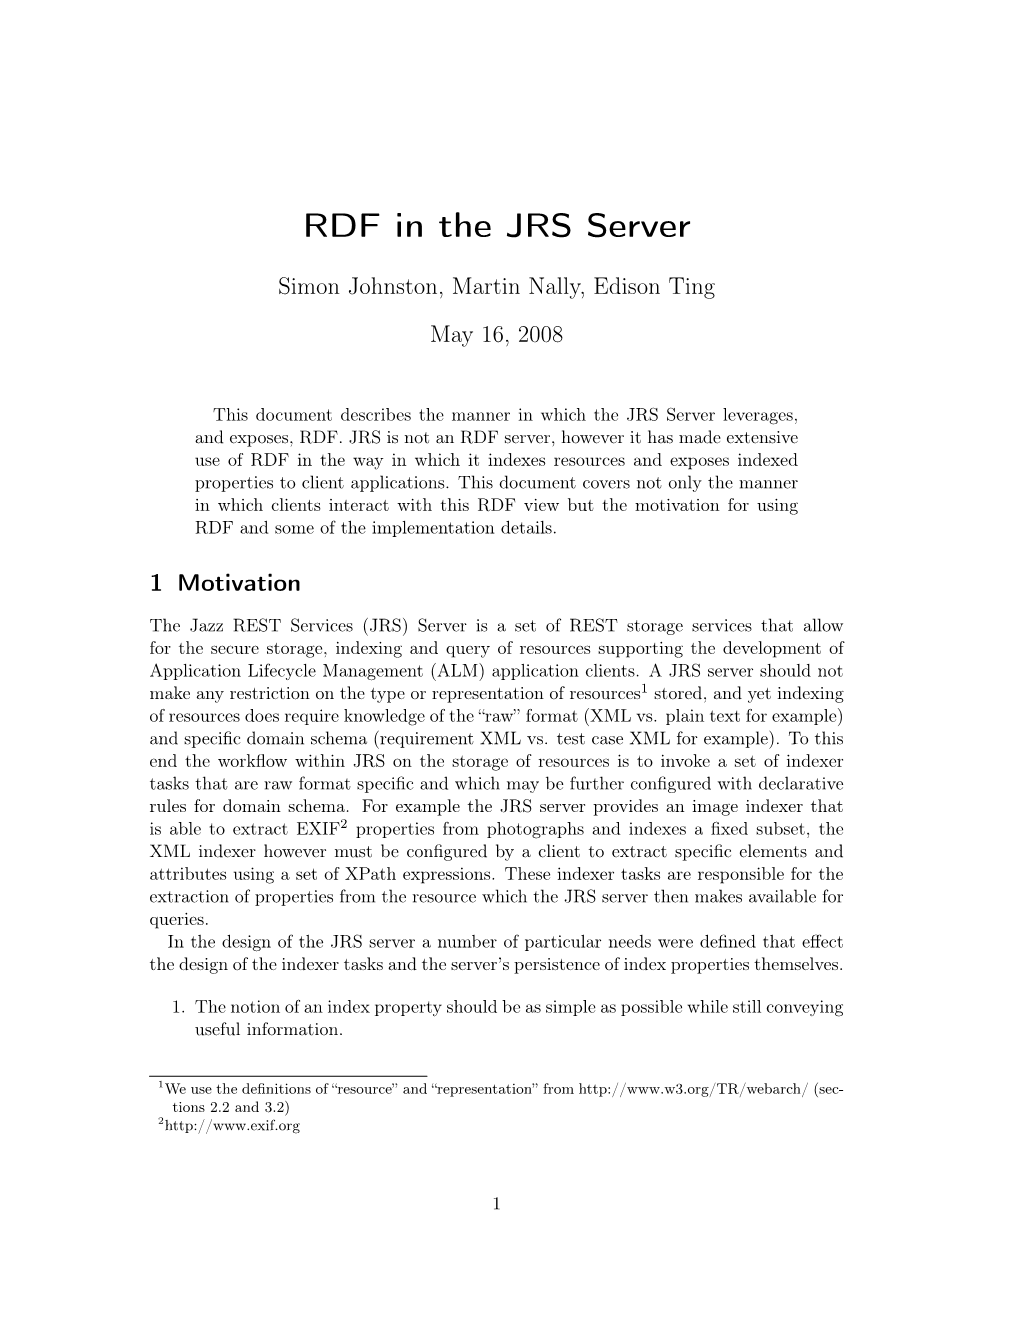 RDF in the JRS Server